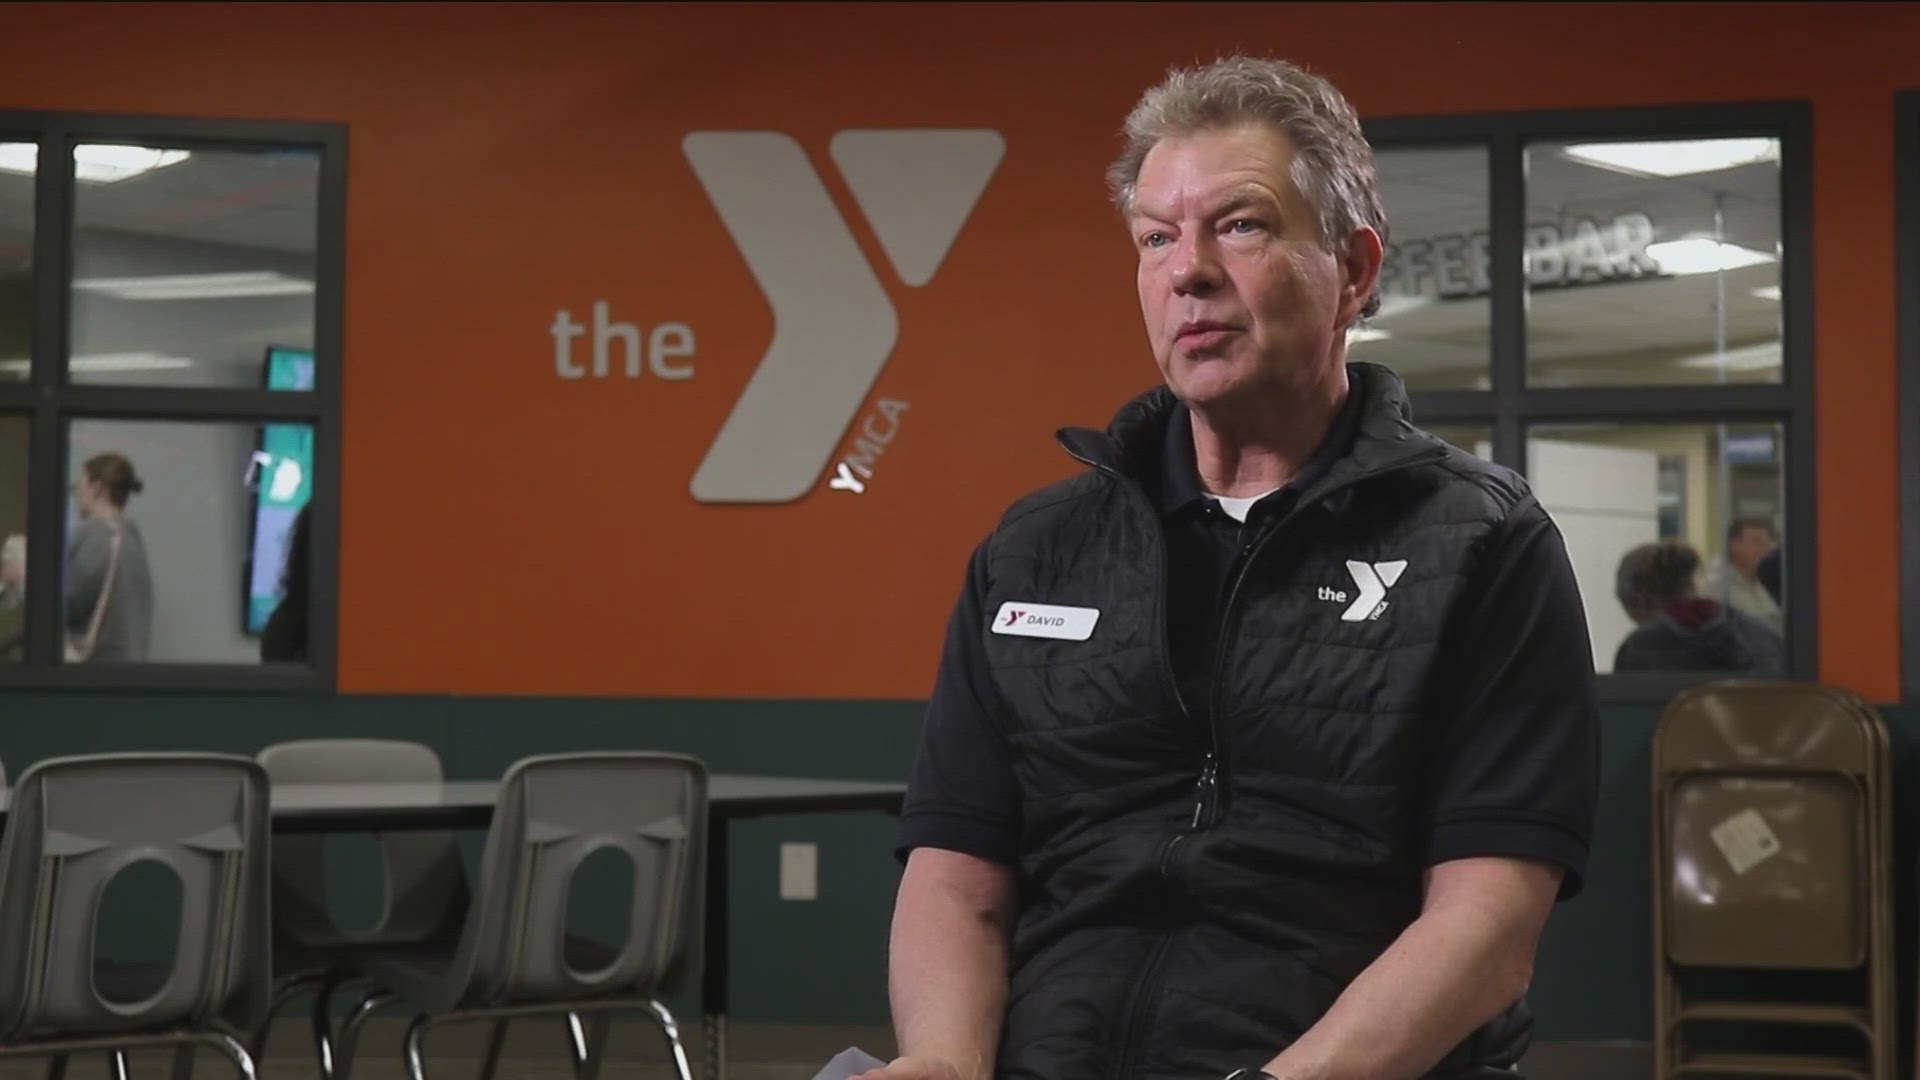 "Fundsy" is technically Boise's oldest nonprofit. This year, the bi-annual fundraiser is coming full circle, raising money to help build Boise's new downtown YMCA.